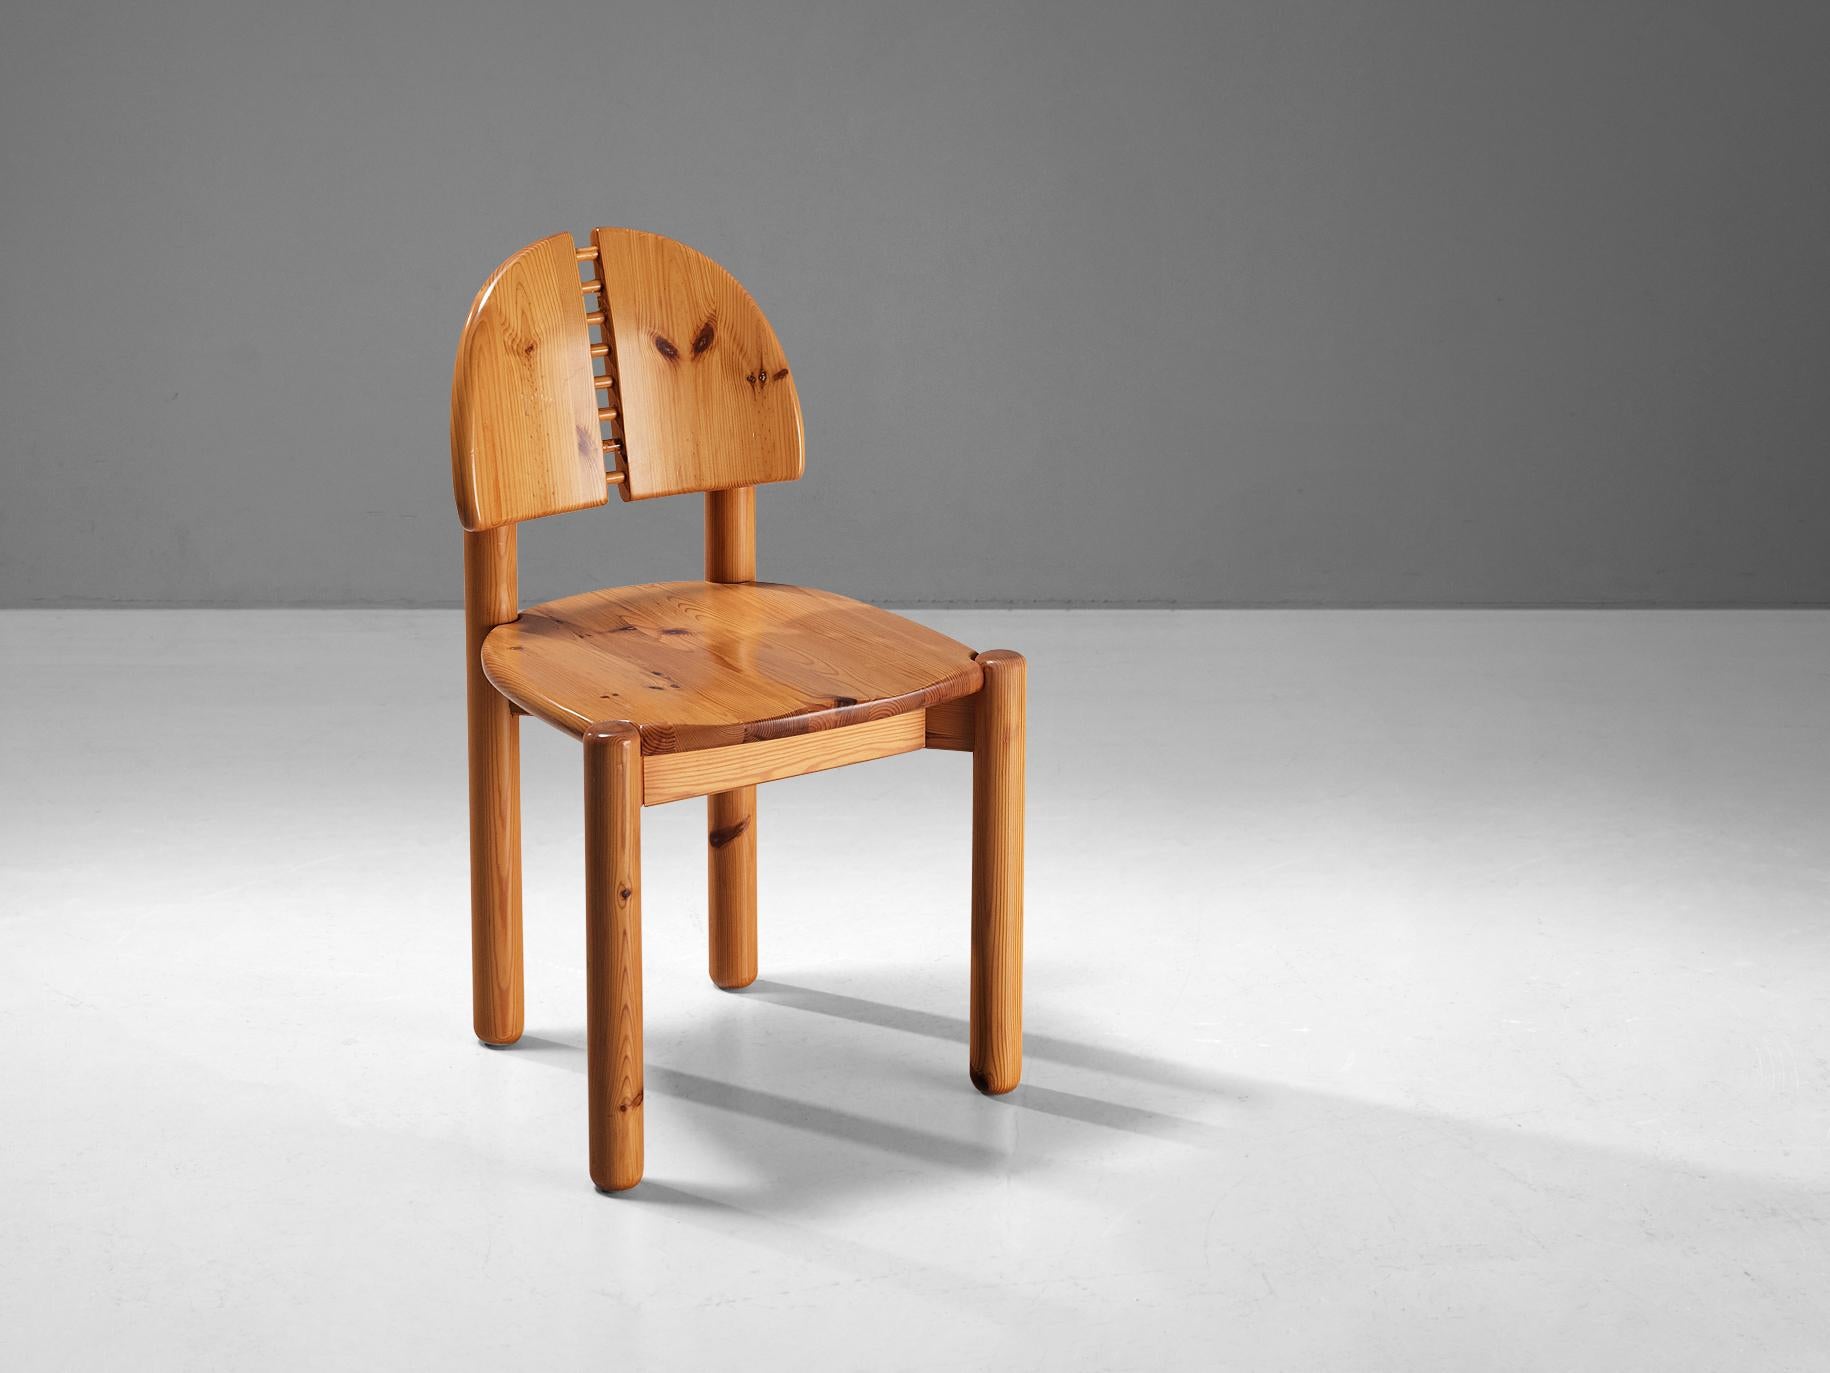 Rainer Daumiller for Hirtshals Savvaerk, dining chair, pine, Denmark, 1970s.

Beautiful organic and natural looking chair in solid pine. A simplistic design with a large seating and attention for the natural expression and grain of the wood. These